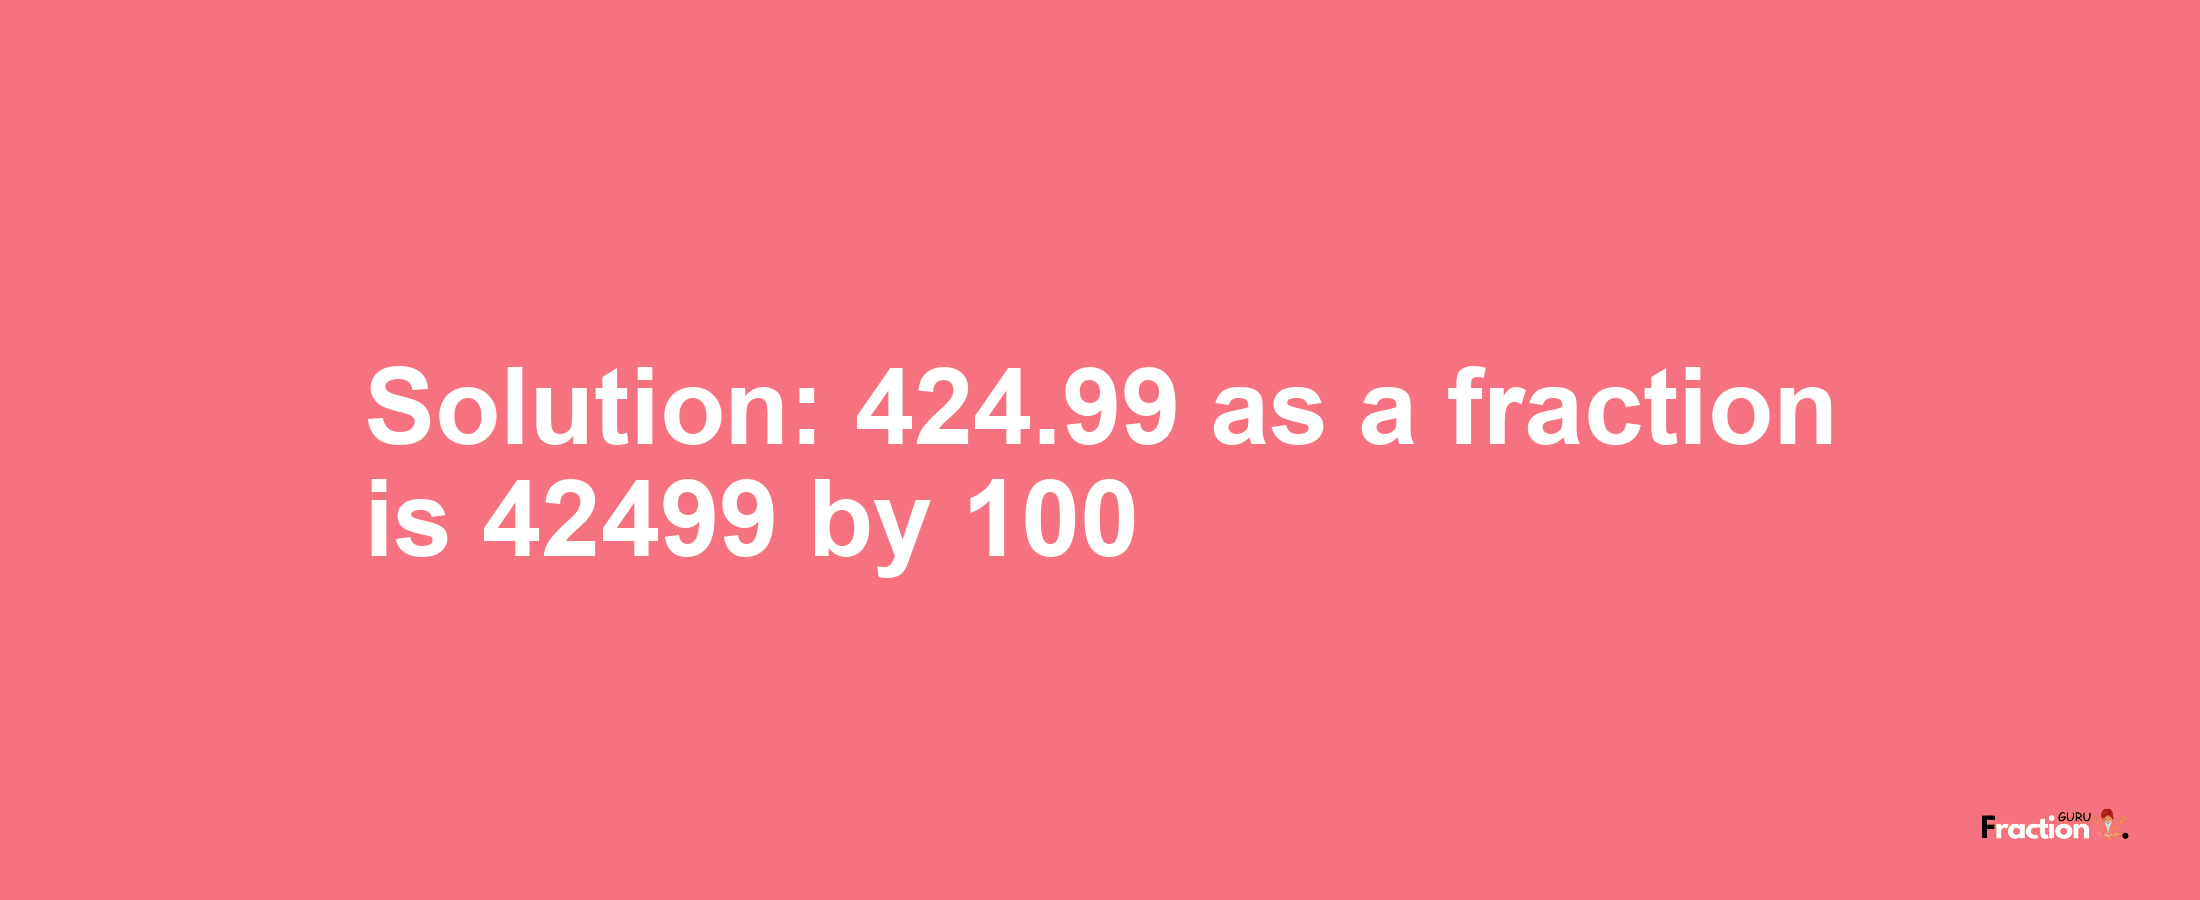 Solution:424.99 as a fraction is 42499/100